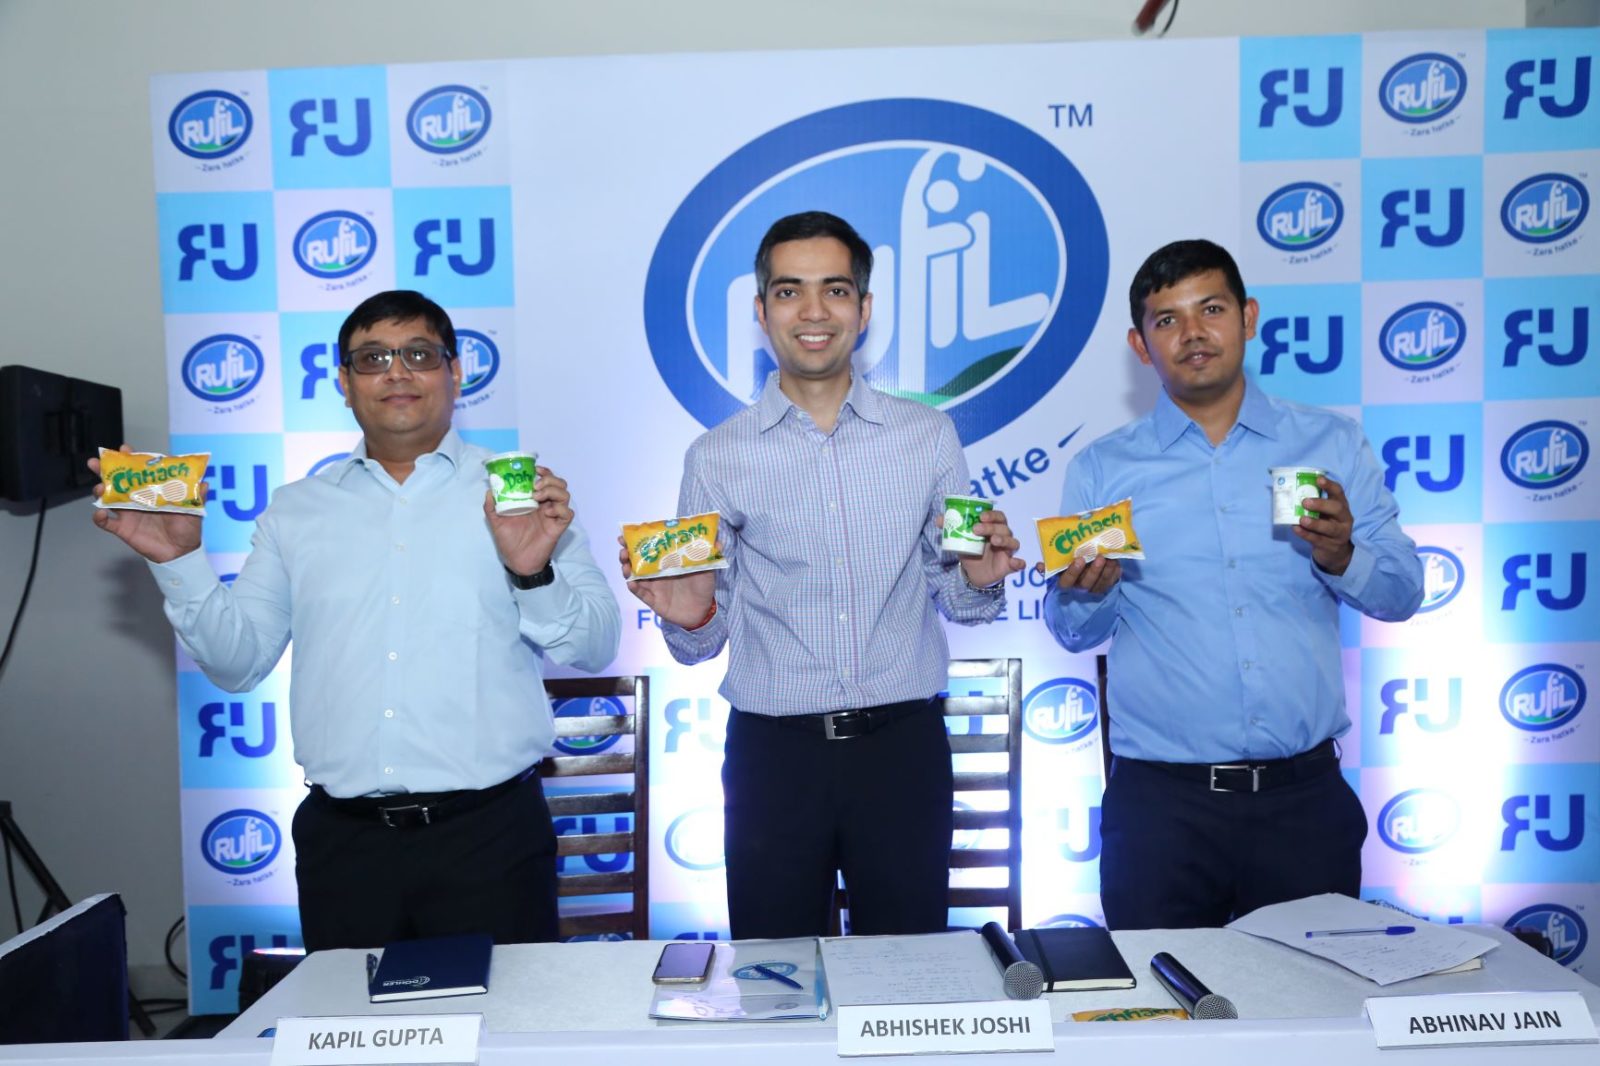 rufil-bets-on-value-added-dairy-products-to-augment-growth